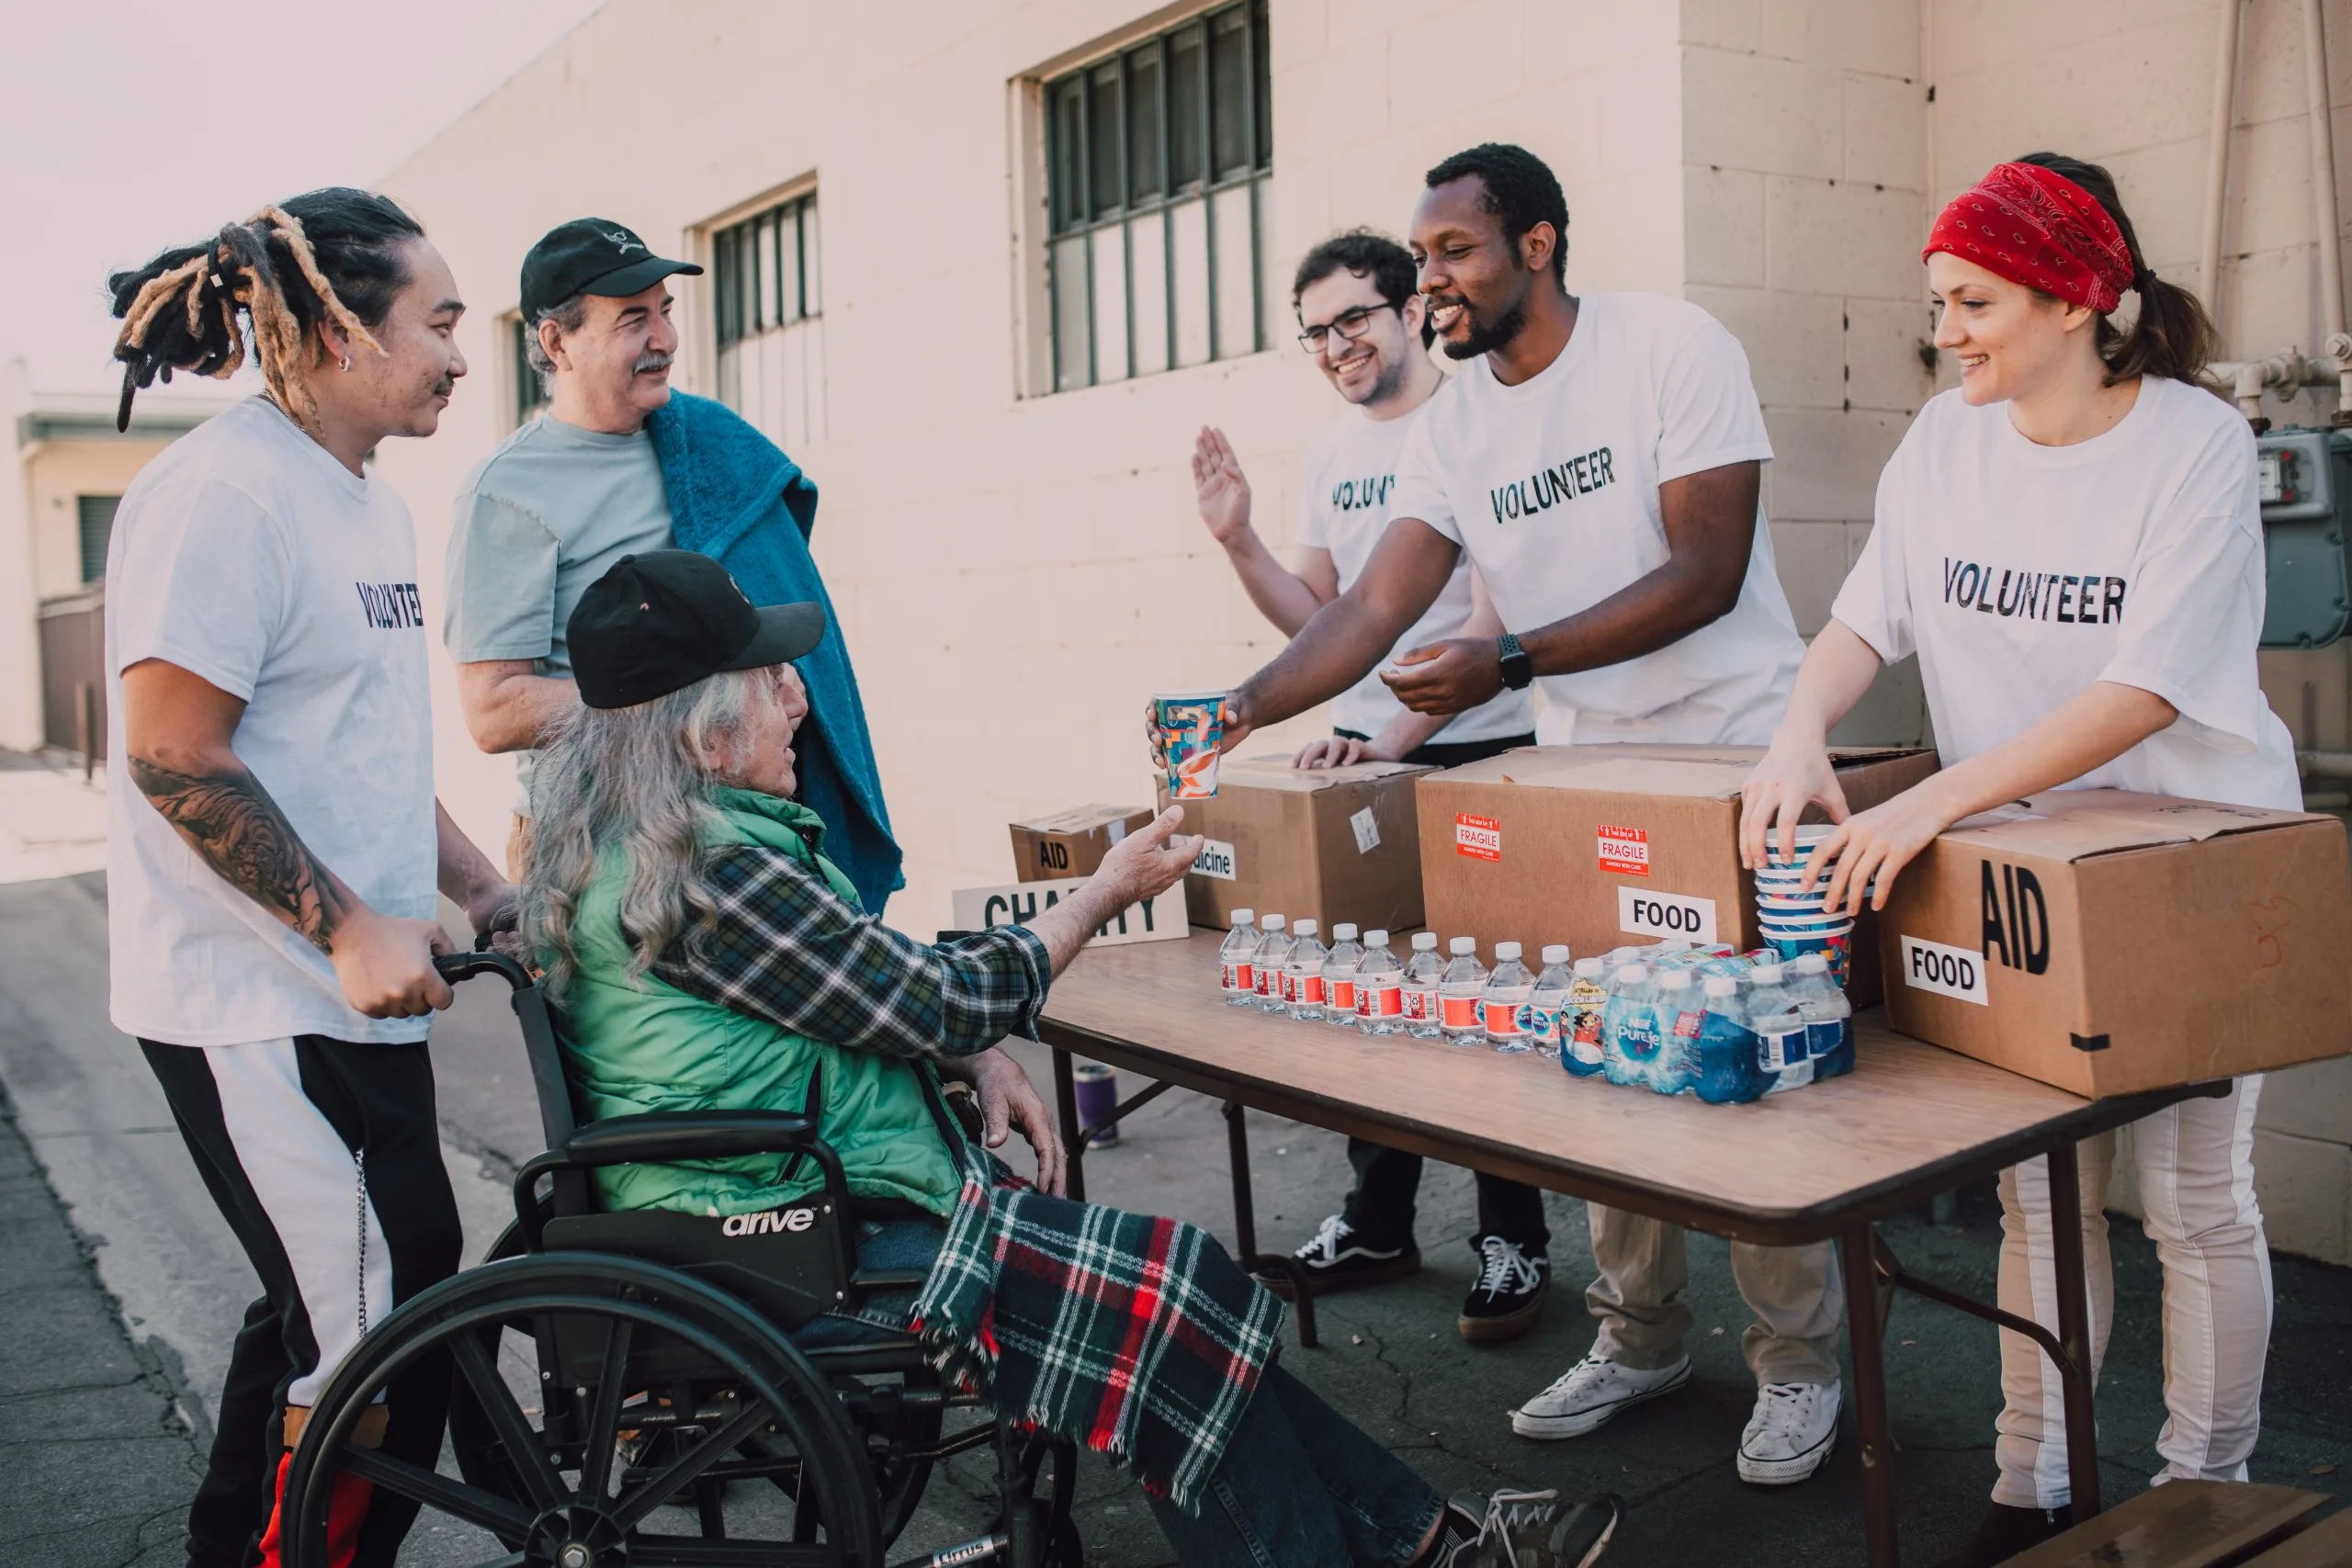 Volunteers giving a cup to an elderly person